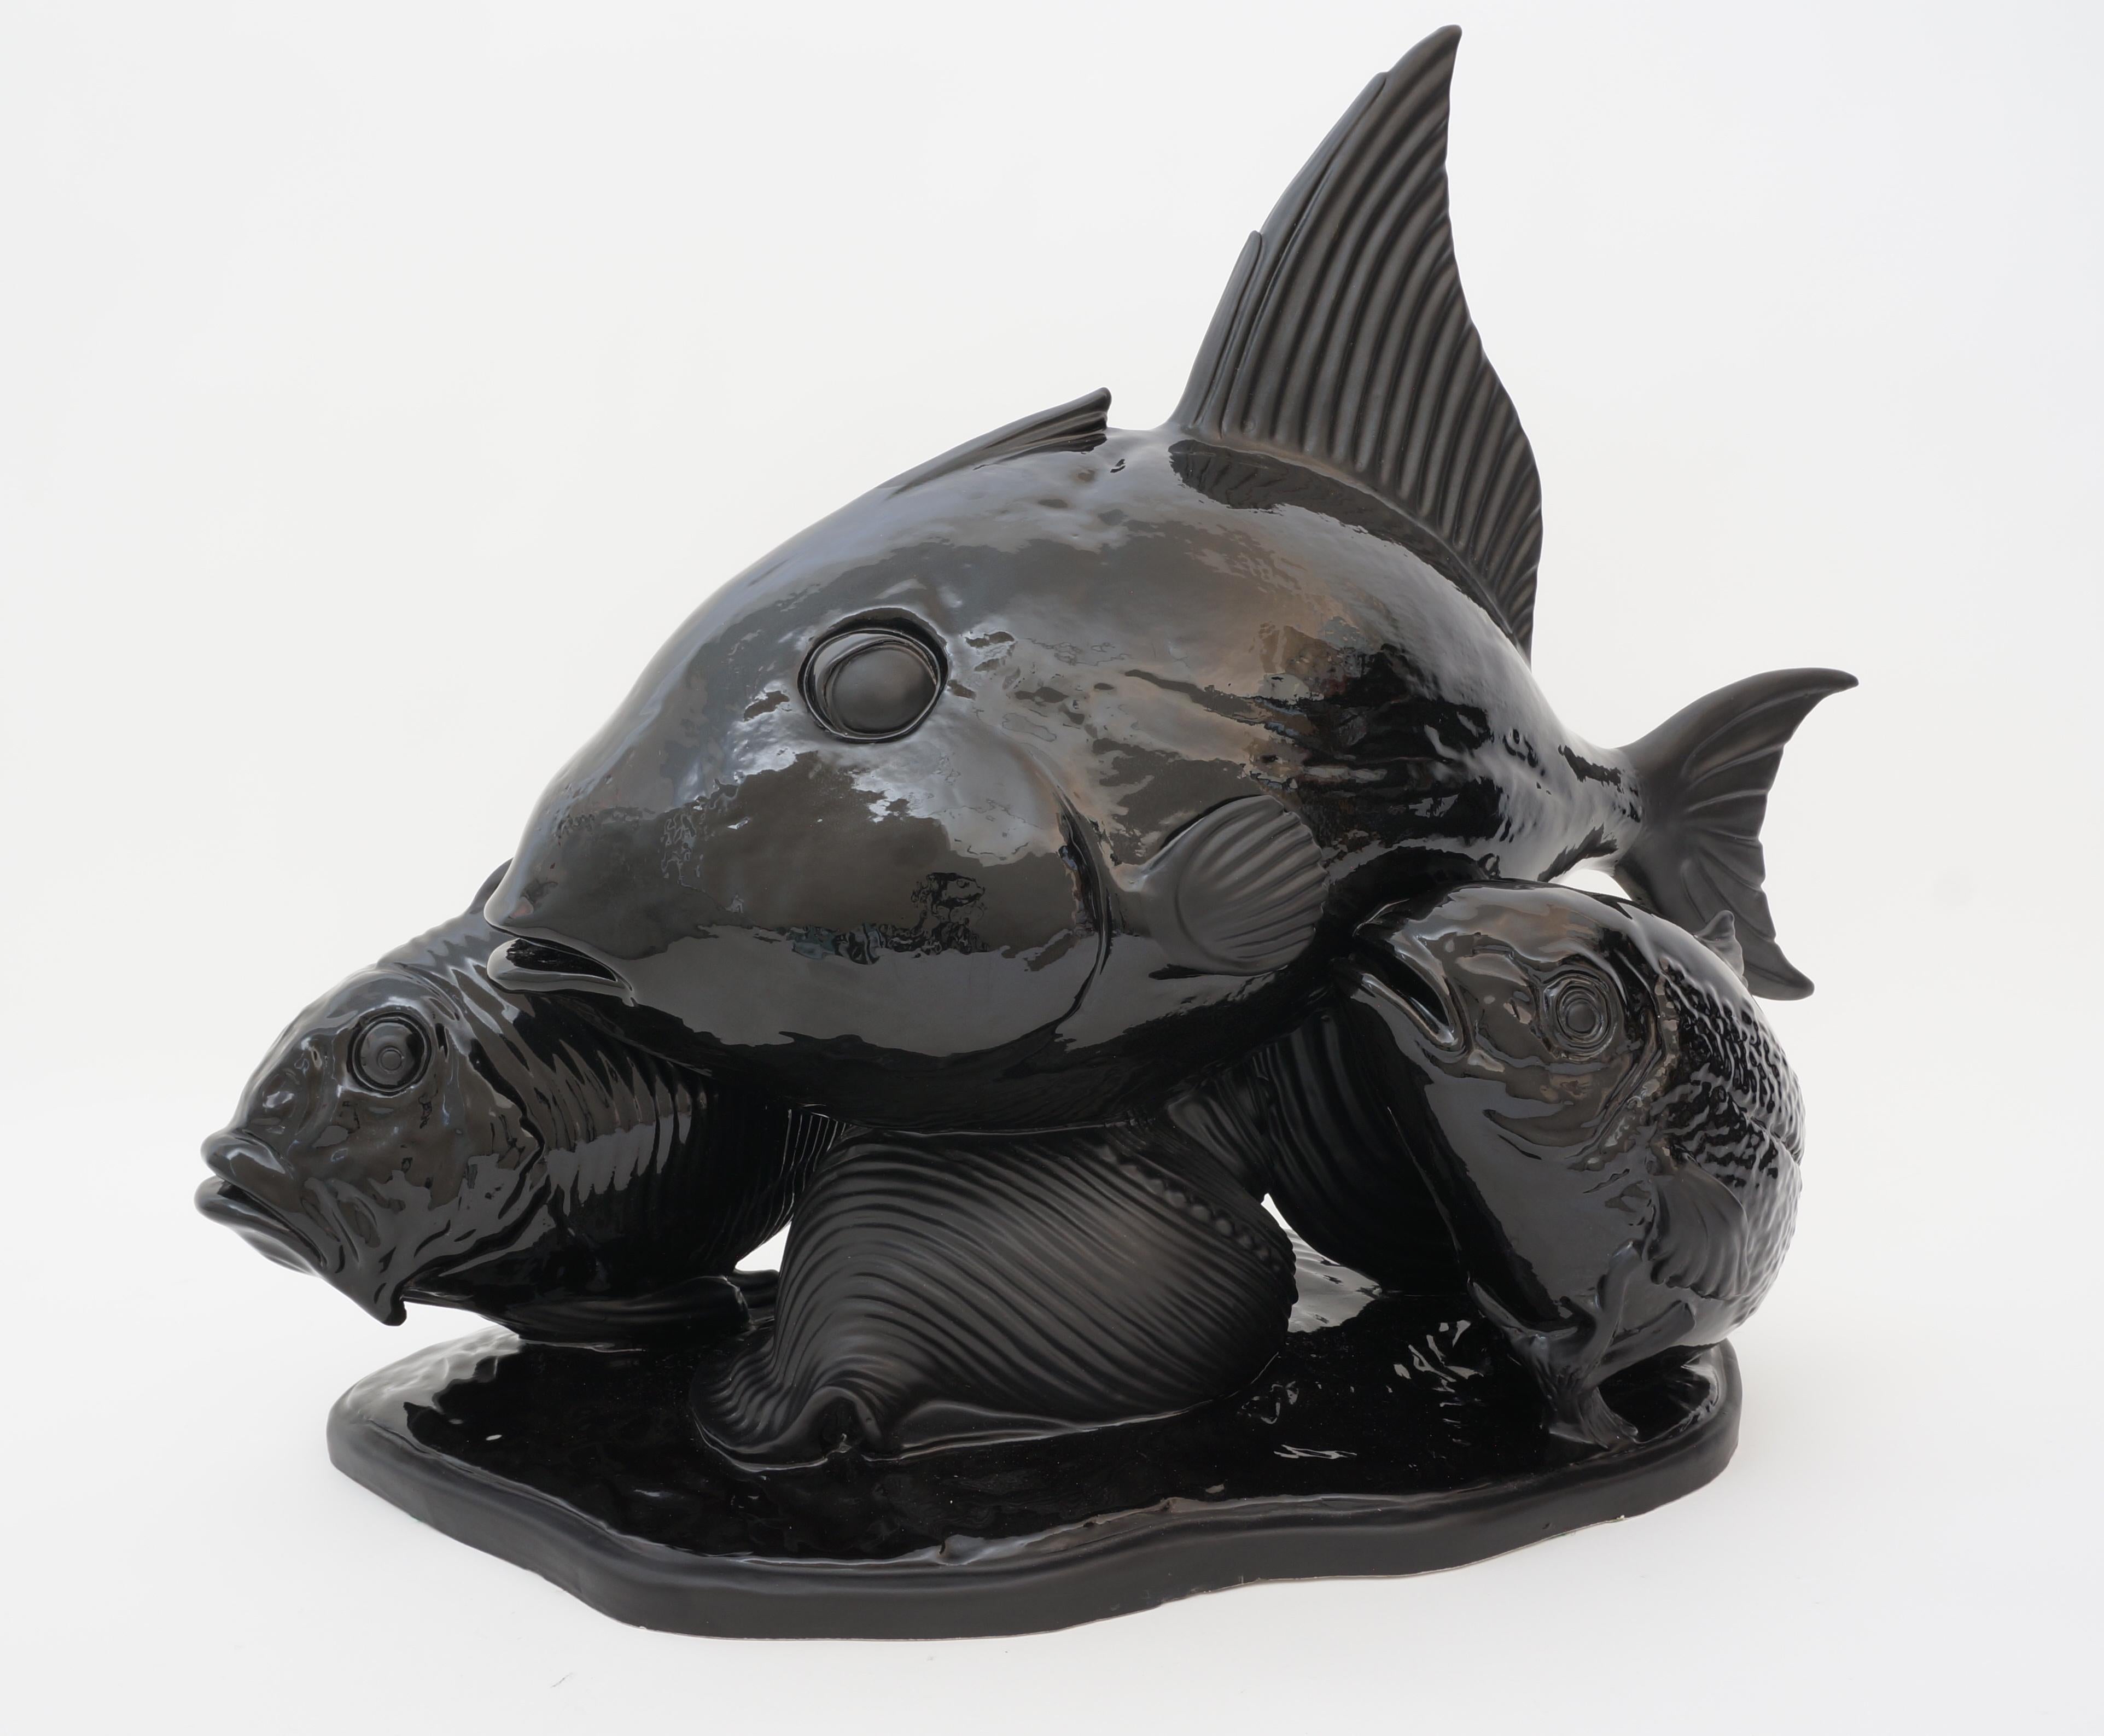 This stylish and chic Italian sculpture of a school of fish had taken its inspiration of the Art Deco period and of pieces by the designer Lejan.

Note: The piece is molded ceramic and is finished in a matte and high gloss black glaze. 